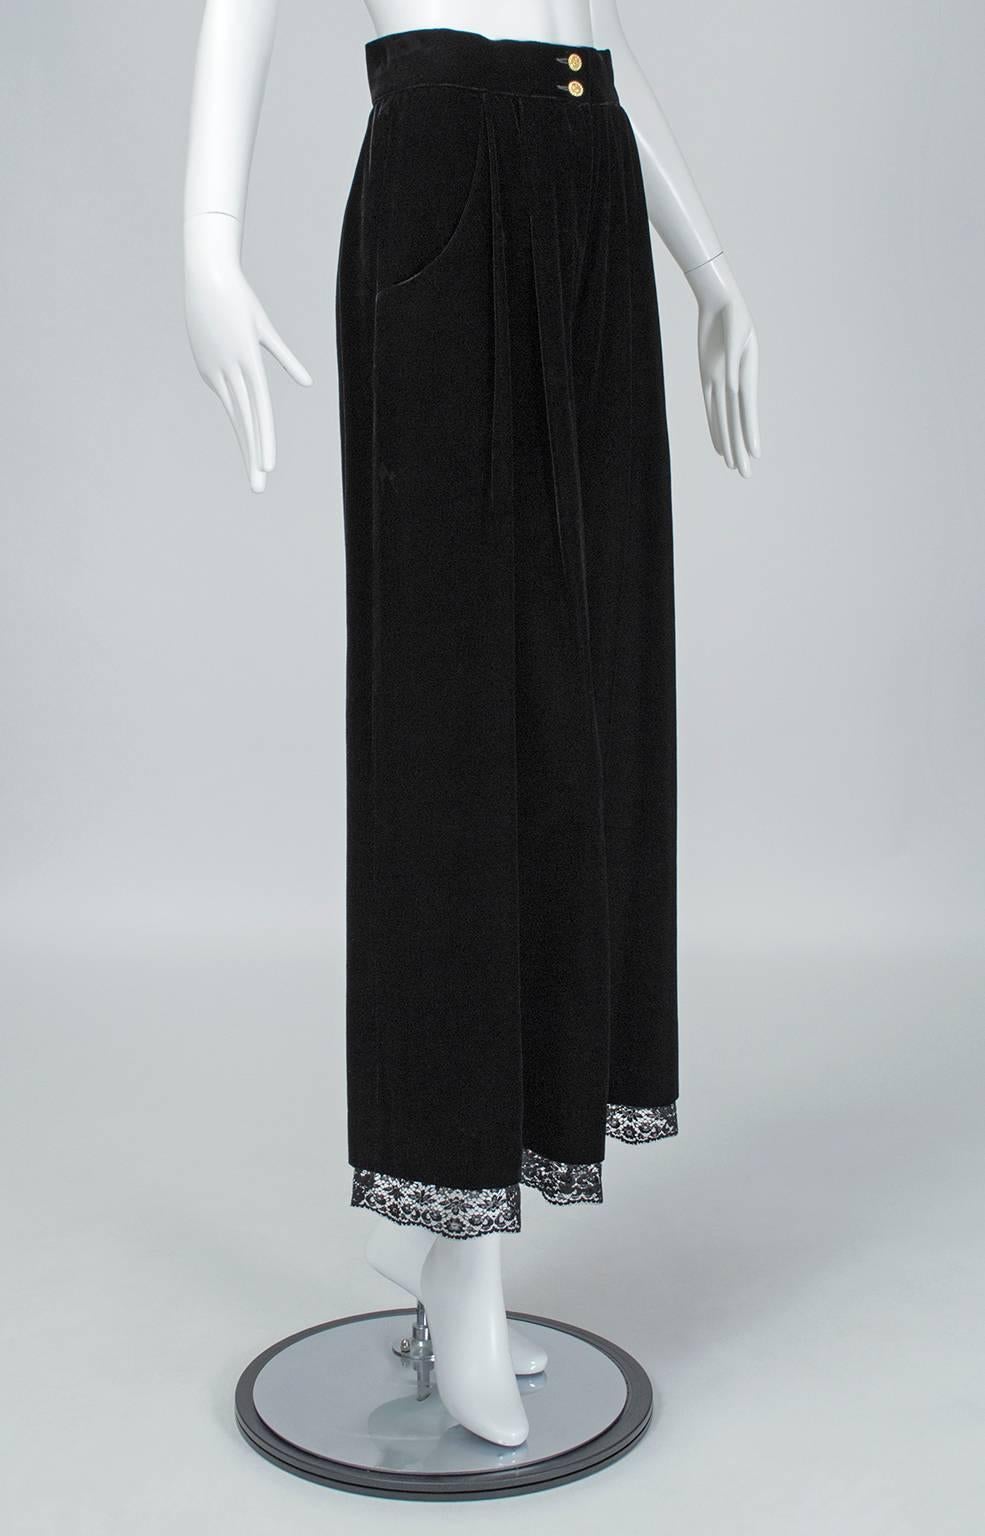 Leave it to Chanel to make even the most pedestrian item--black trousers--special. Made of the most plush, liquid velvet these culottes are trimmed at each cuff with black lace but remain as wearable (and comfortable) as your favorite jeans.

Wide